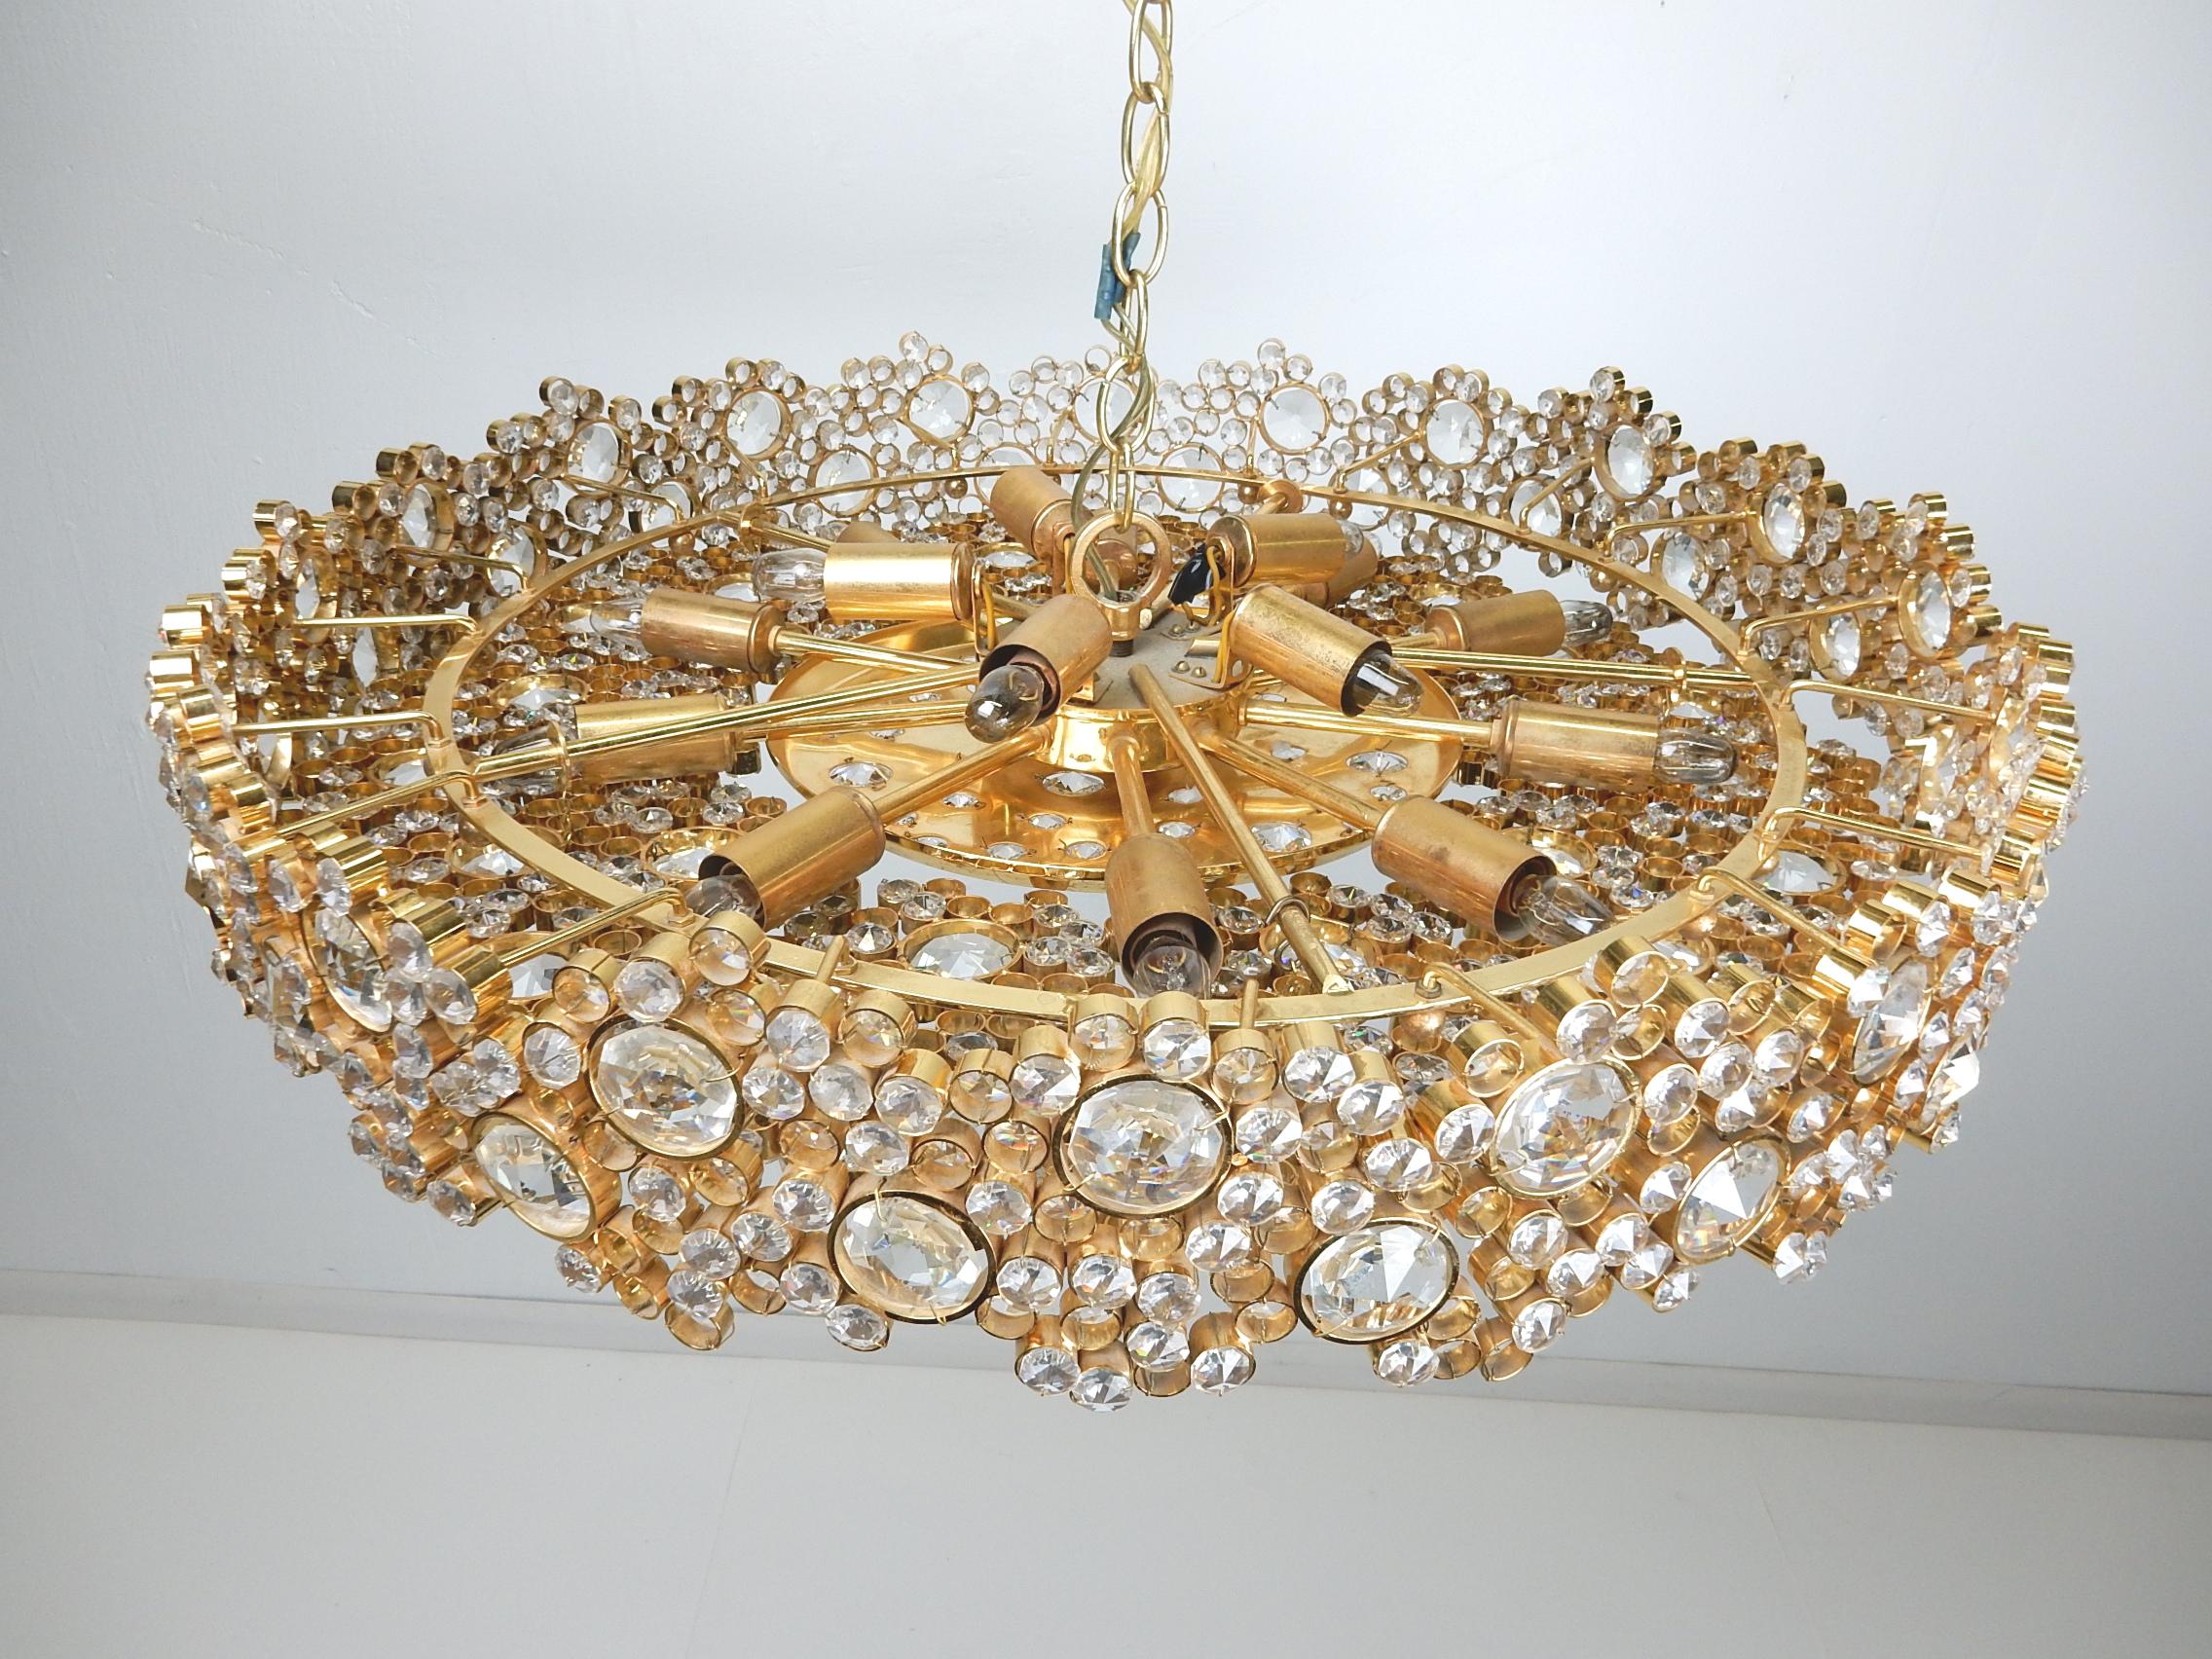 Fabulous 1960s 24-karat gold-plated and crystal glass chandelier by Palwa (Palme & Walter) of Germany.
This is the big one with 15 candle bulbs measuring over 26 inch wide.
6 inches tall sides on a 20 inch drop chain.
Marked Made in Germany in 2